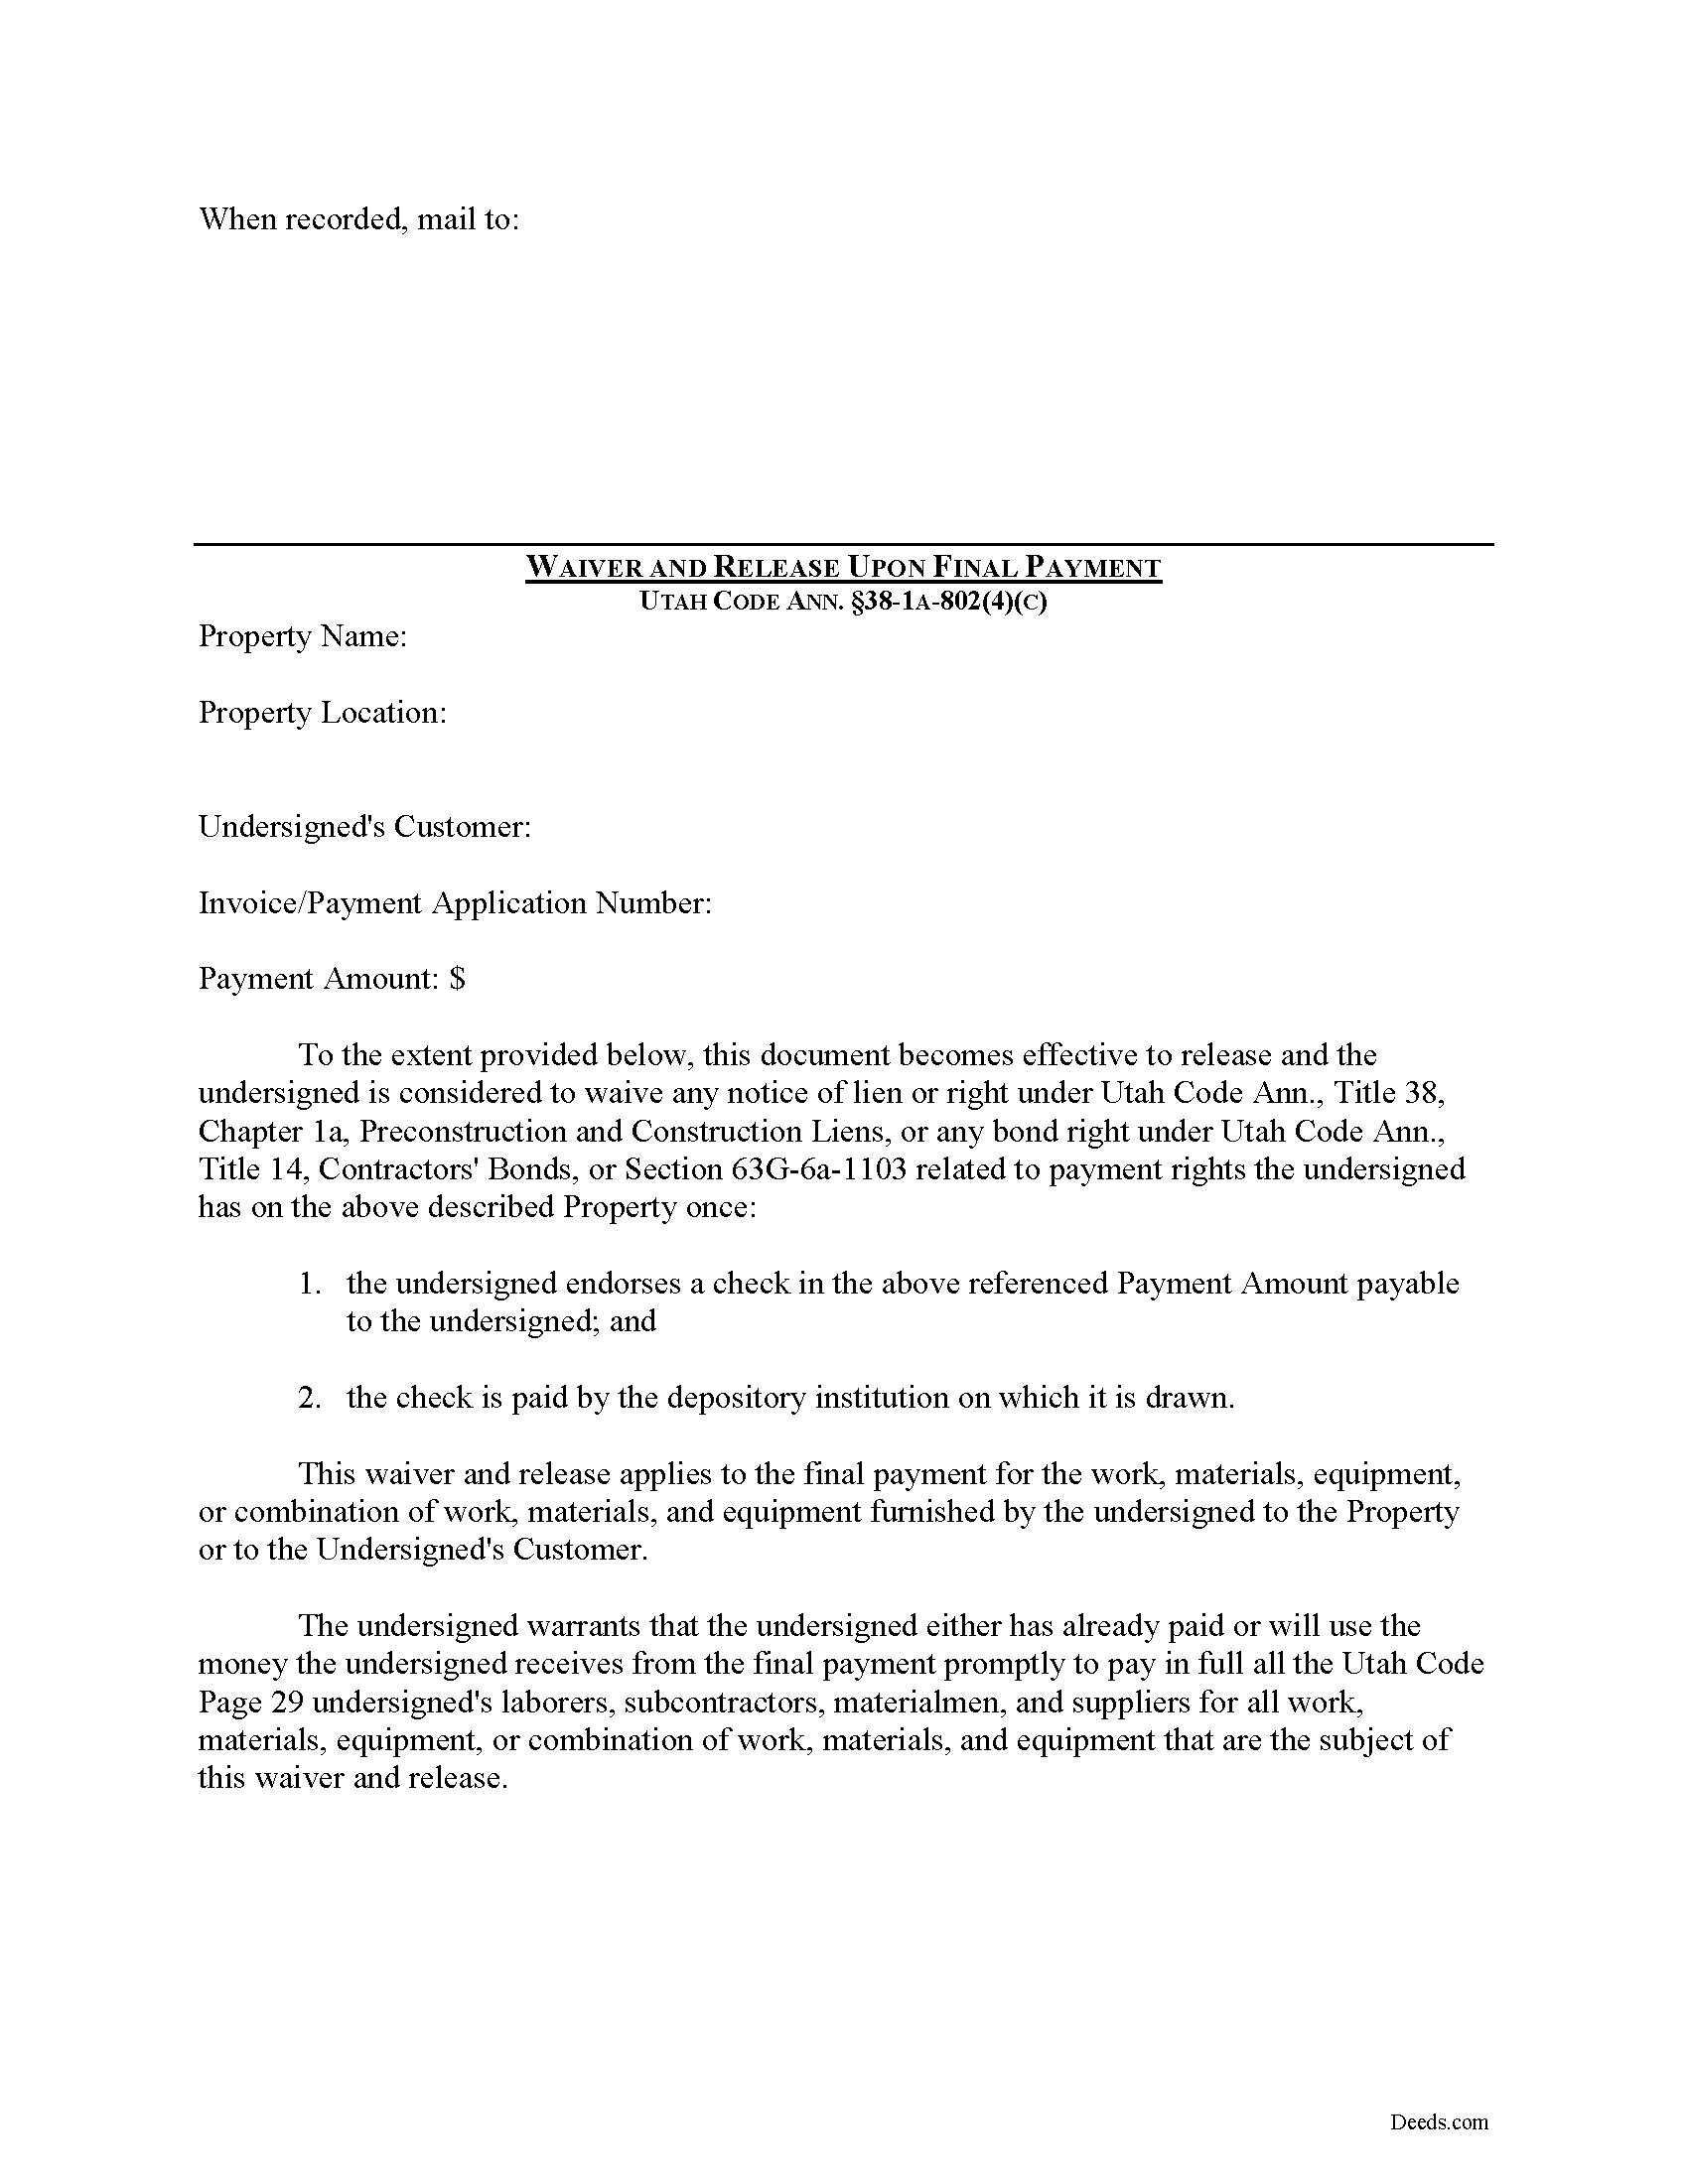 Waiver and Release on Final Payment